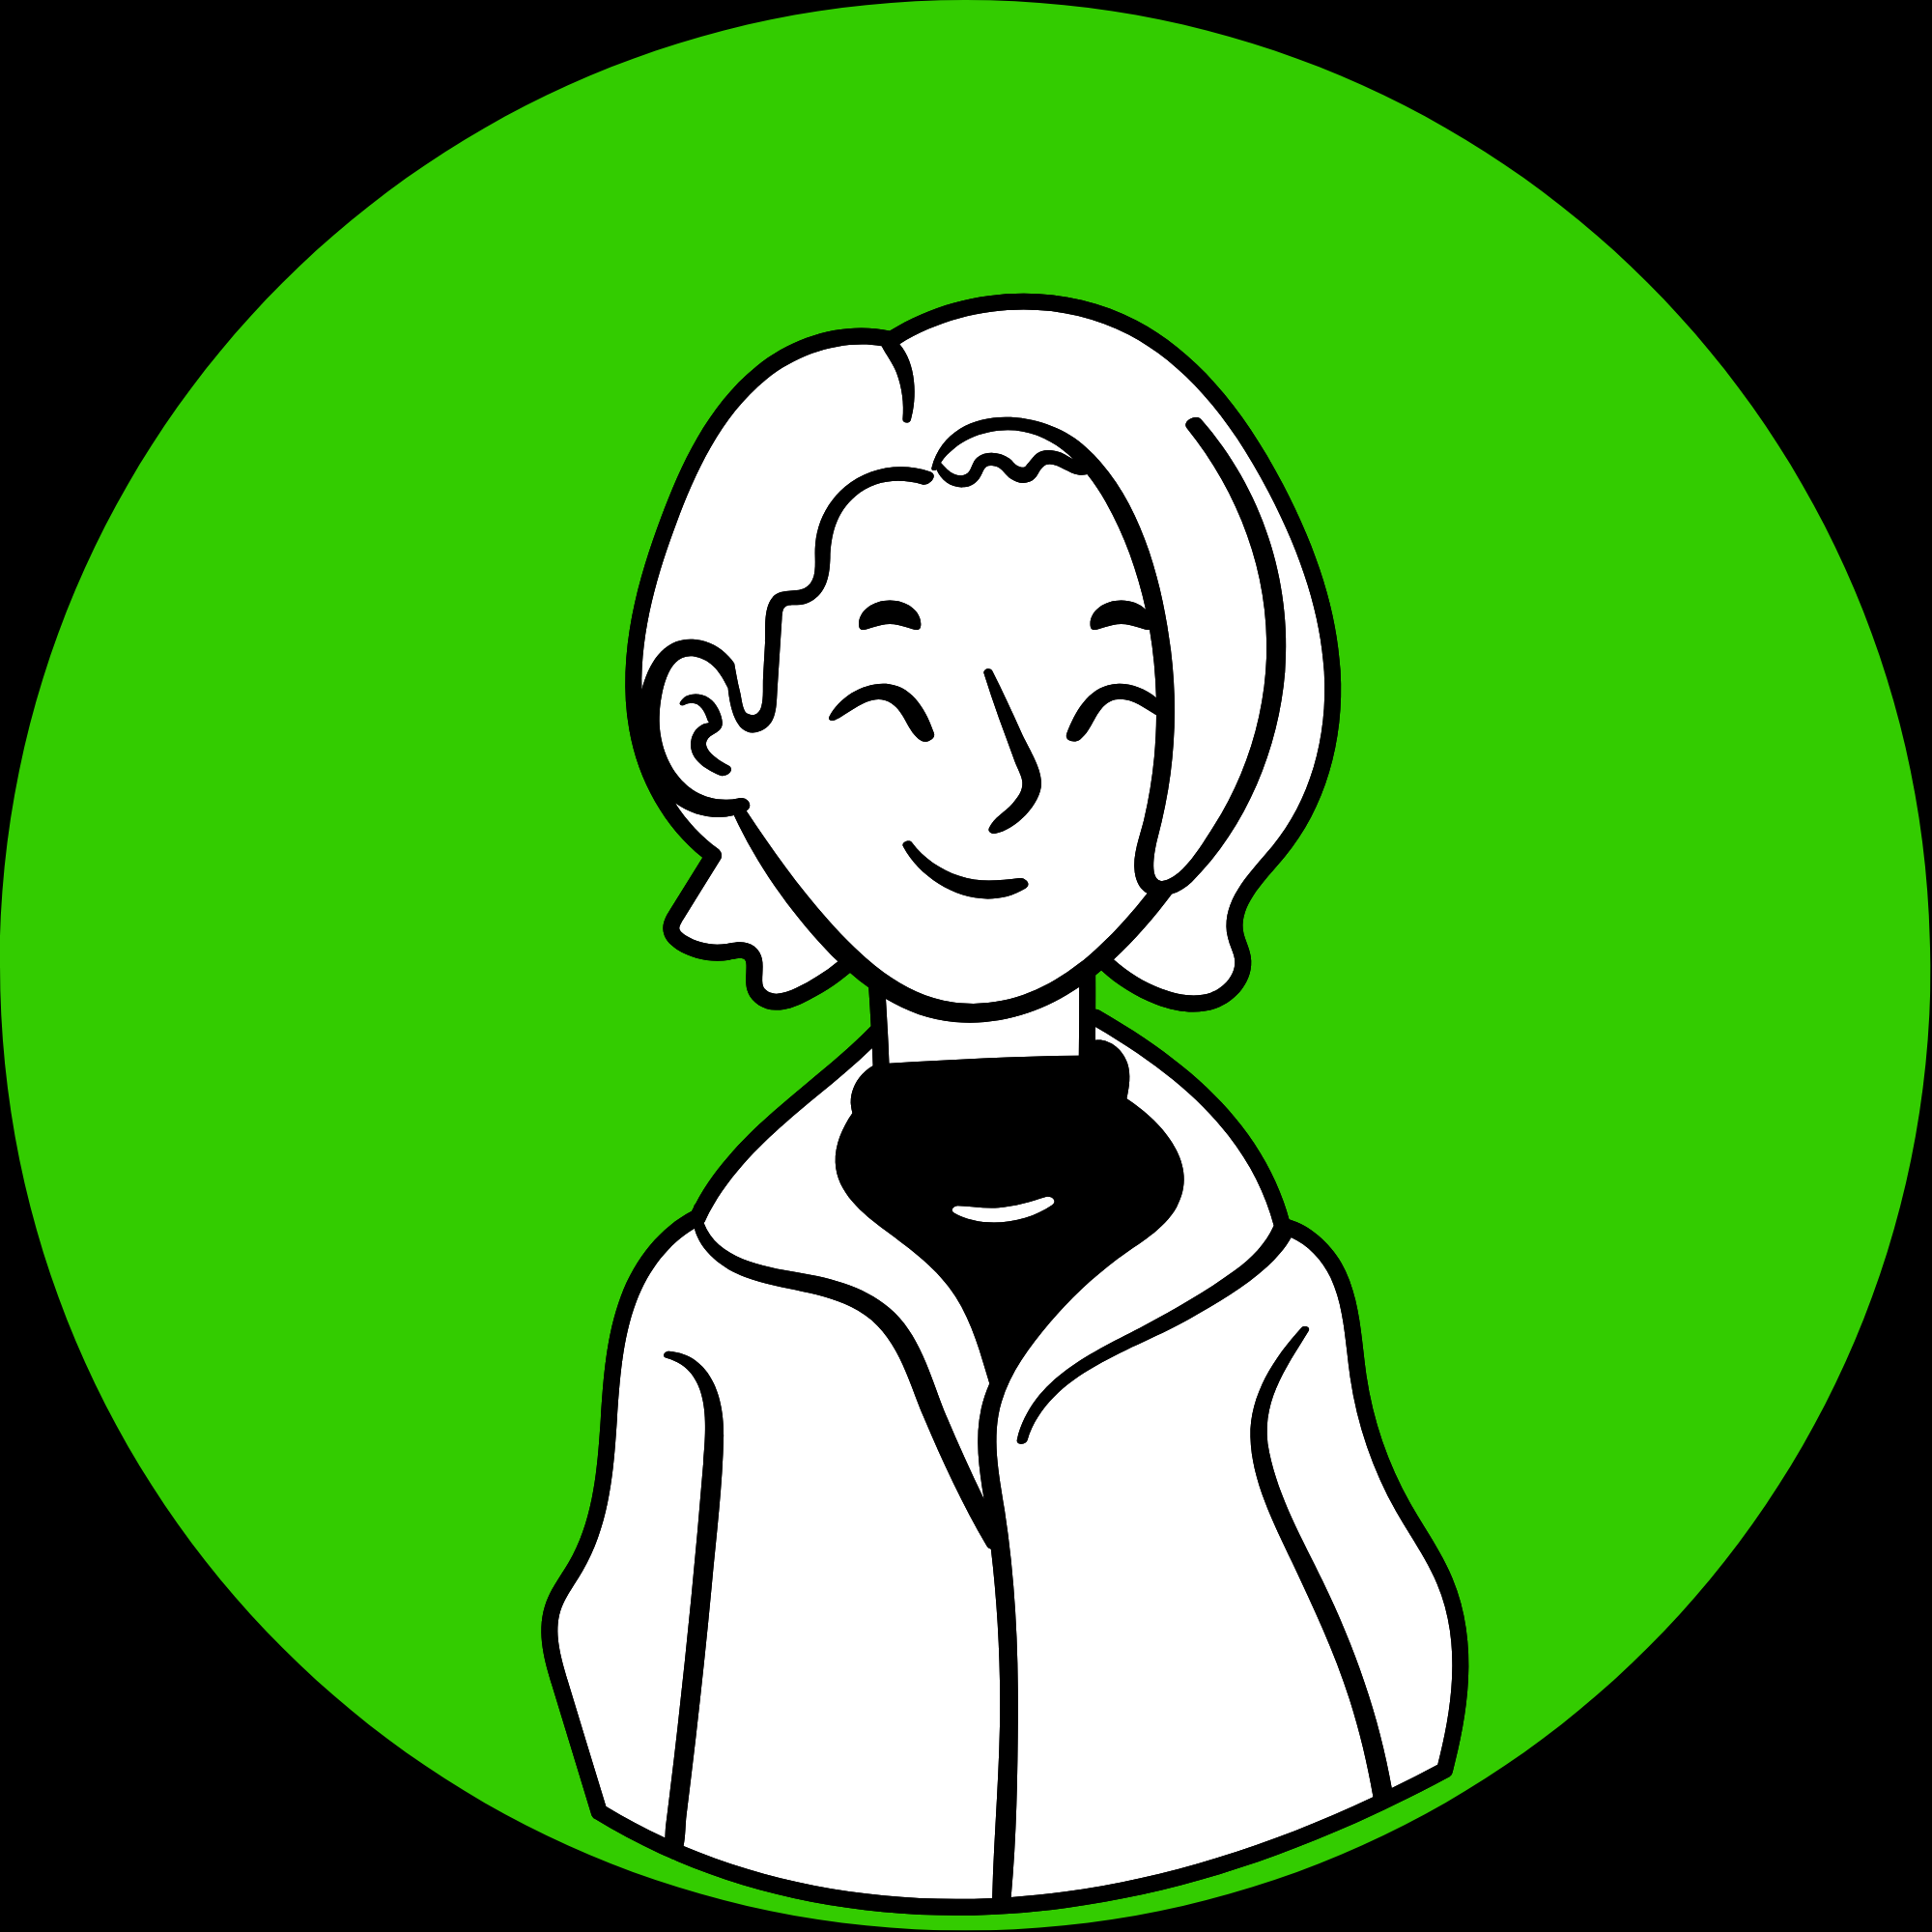 This is my Green Dot avatar, created within the ongoing process that is Green Dot.